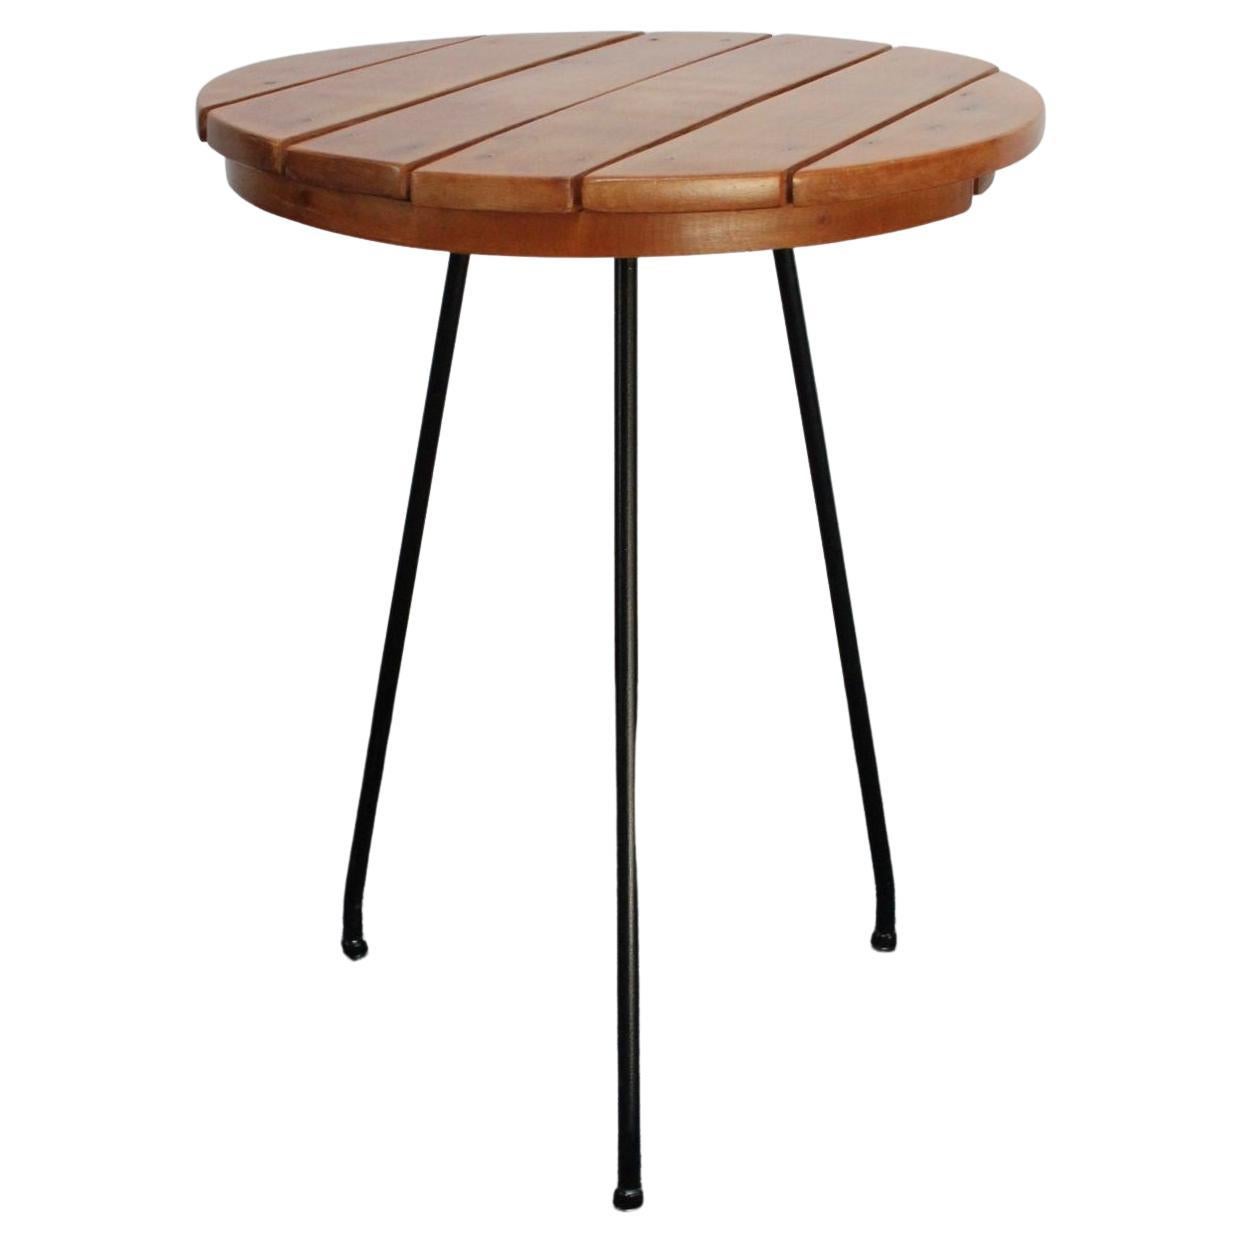 Mid-Century American Modern Birch and Iron Accent Table by Arthur Umanoff